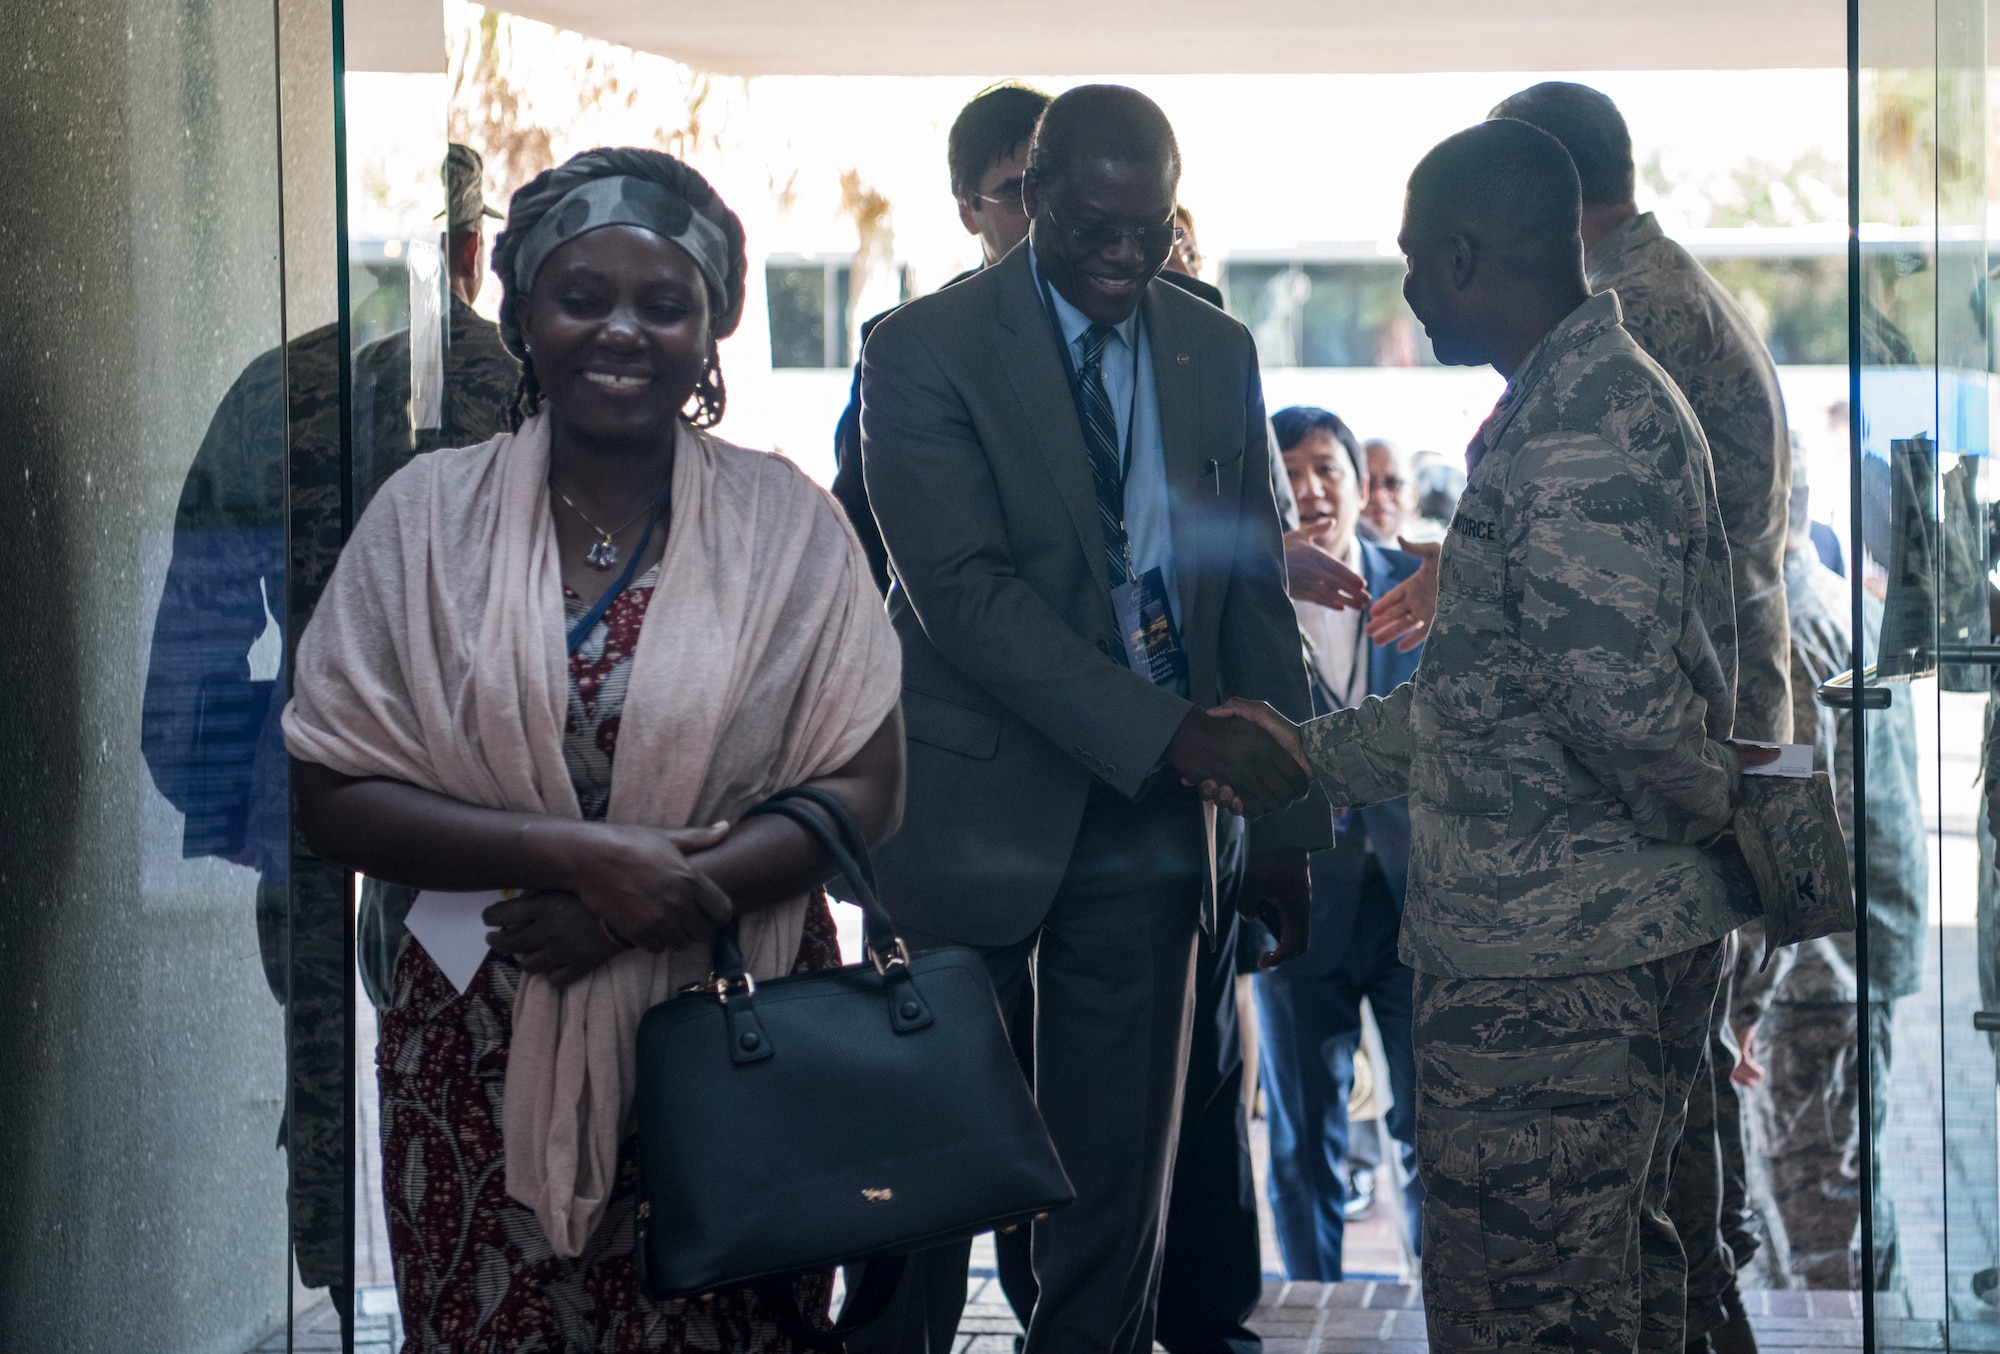 U.S. Air Force Col. Terrence Adams, right, greets the foreign ambassadors and spouses walking into the wing headquarters building Oct. 15, 2018, at Joint Base Charleston, S.C. Hosting the ambassadors allowed JB Charleston to showcase its warfighting capabilities and assets, while also building relations with key representatives from around the globe.